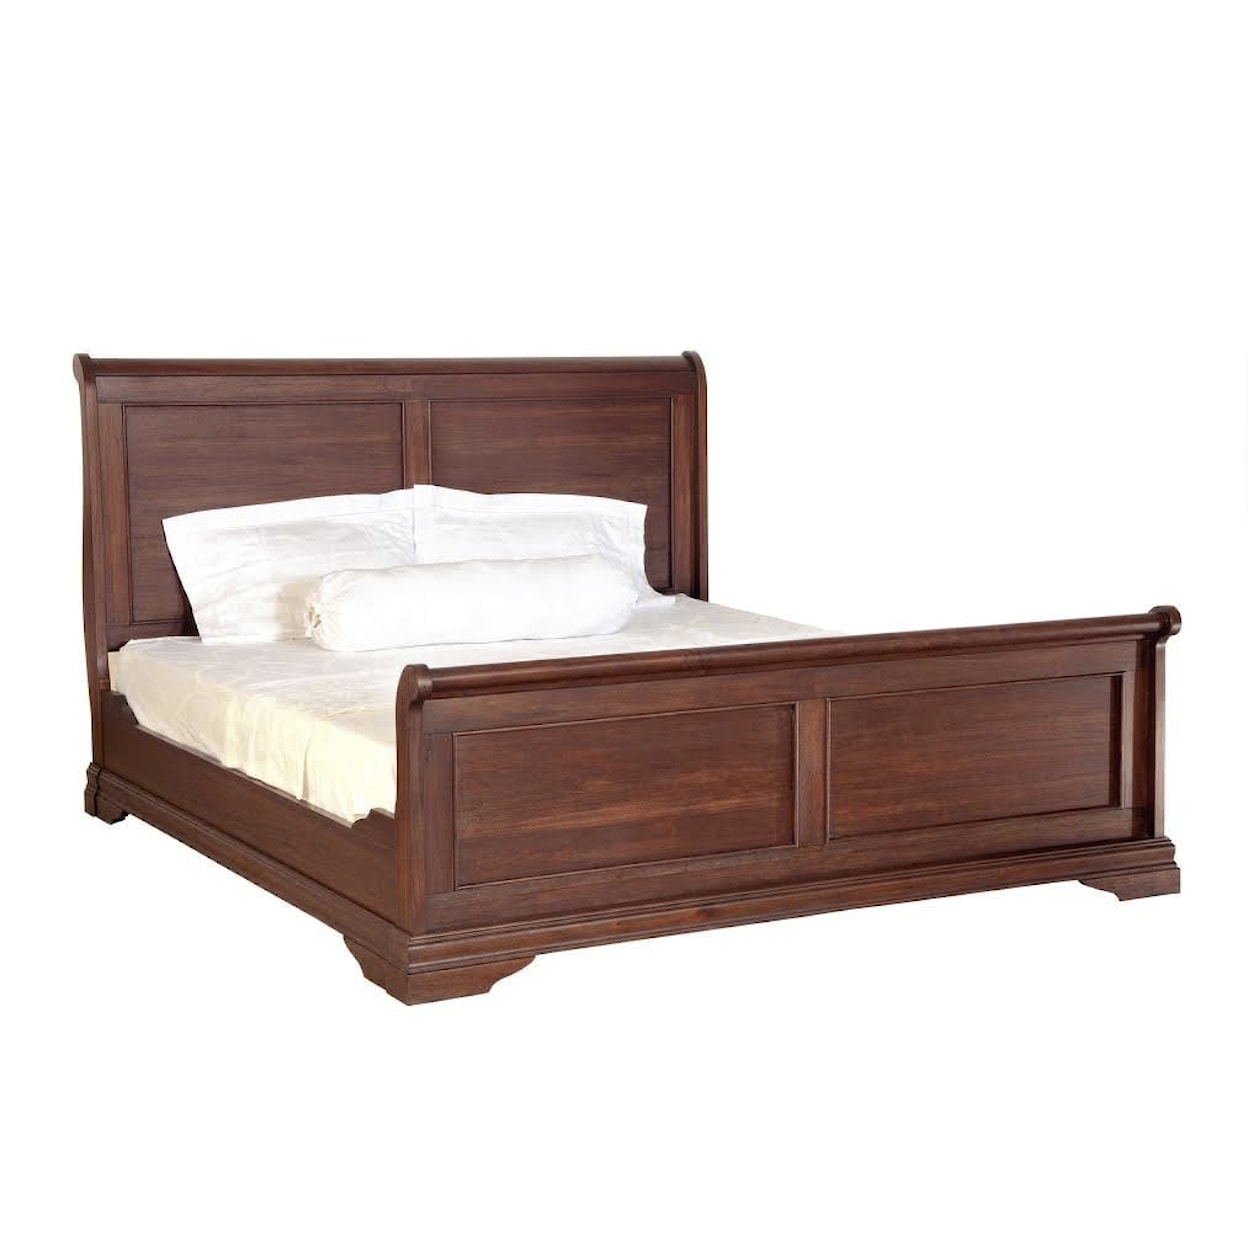 Napa Furniture Design French Classic Queen Sleigh Bed